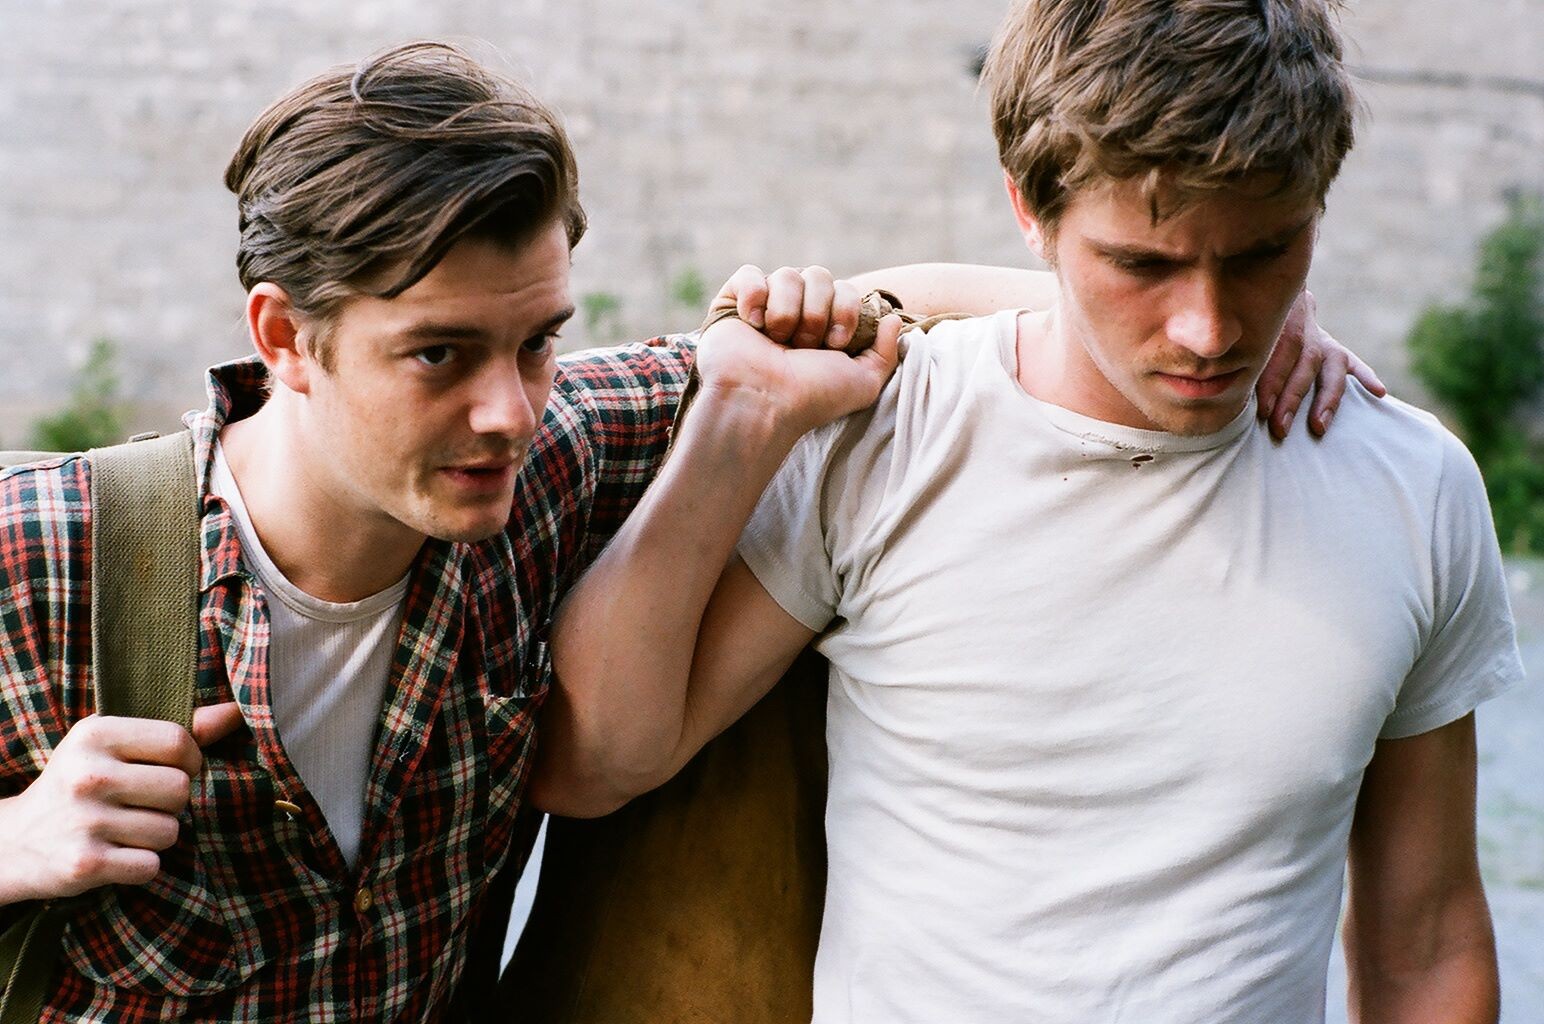 Sam Riley stars as Sal Paradise and Garrett Hedlund stars as Dean Moriarty in IFC Films' On the Road (2012)